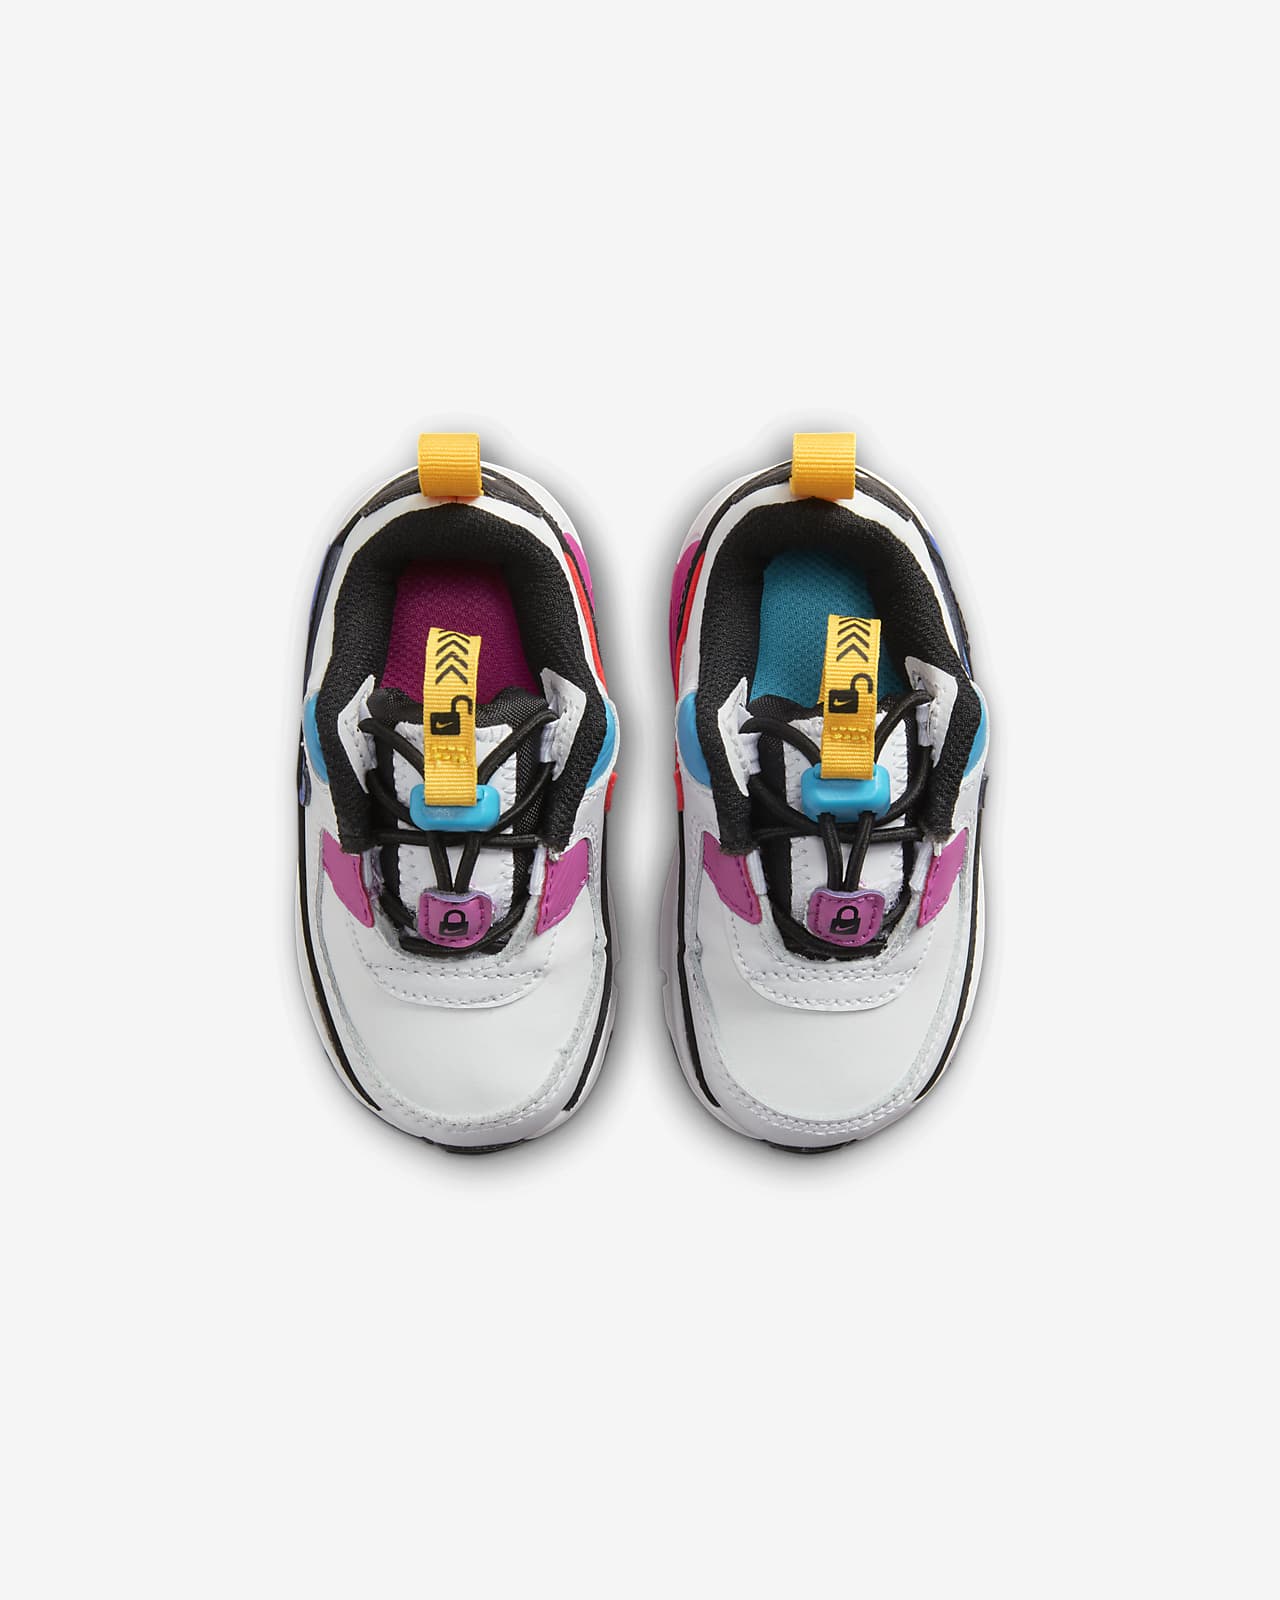 donor Verwarren Luchtpost Nike Air Max 90 Toggle SE Baby/Toddler Shoes. Nike.com